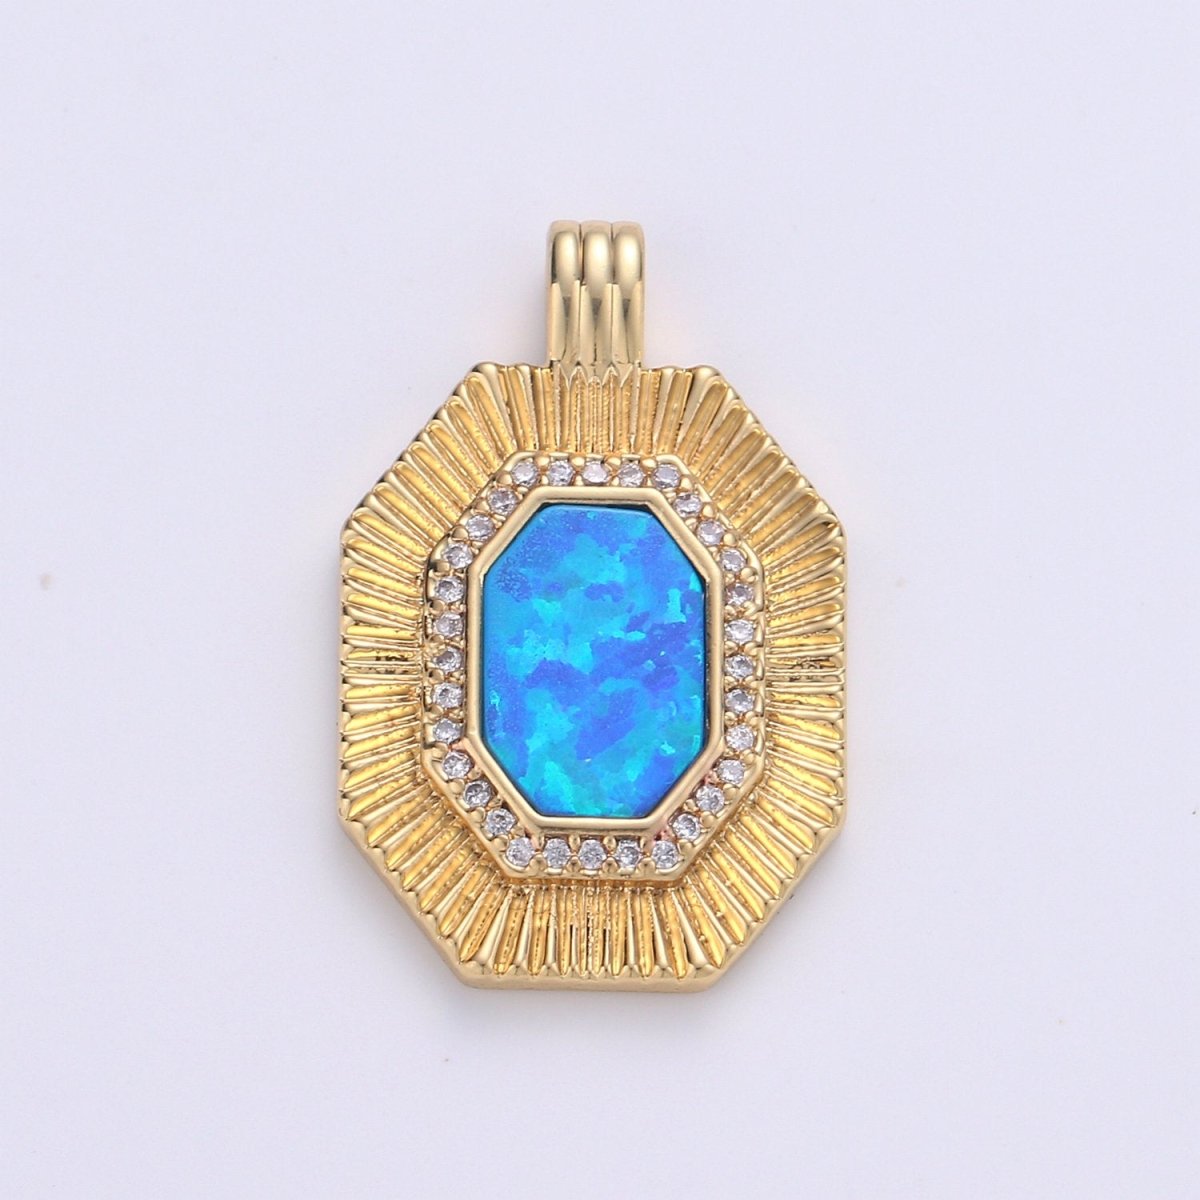 Octagon with Opal Tag Geometric Pendants • Gold Micro Pave cubic Zirconia Pendant • 14k Gold Filled Pendant Medallion Charm Geometric Jewelry Supply - DLUXCA